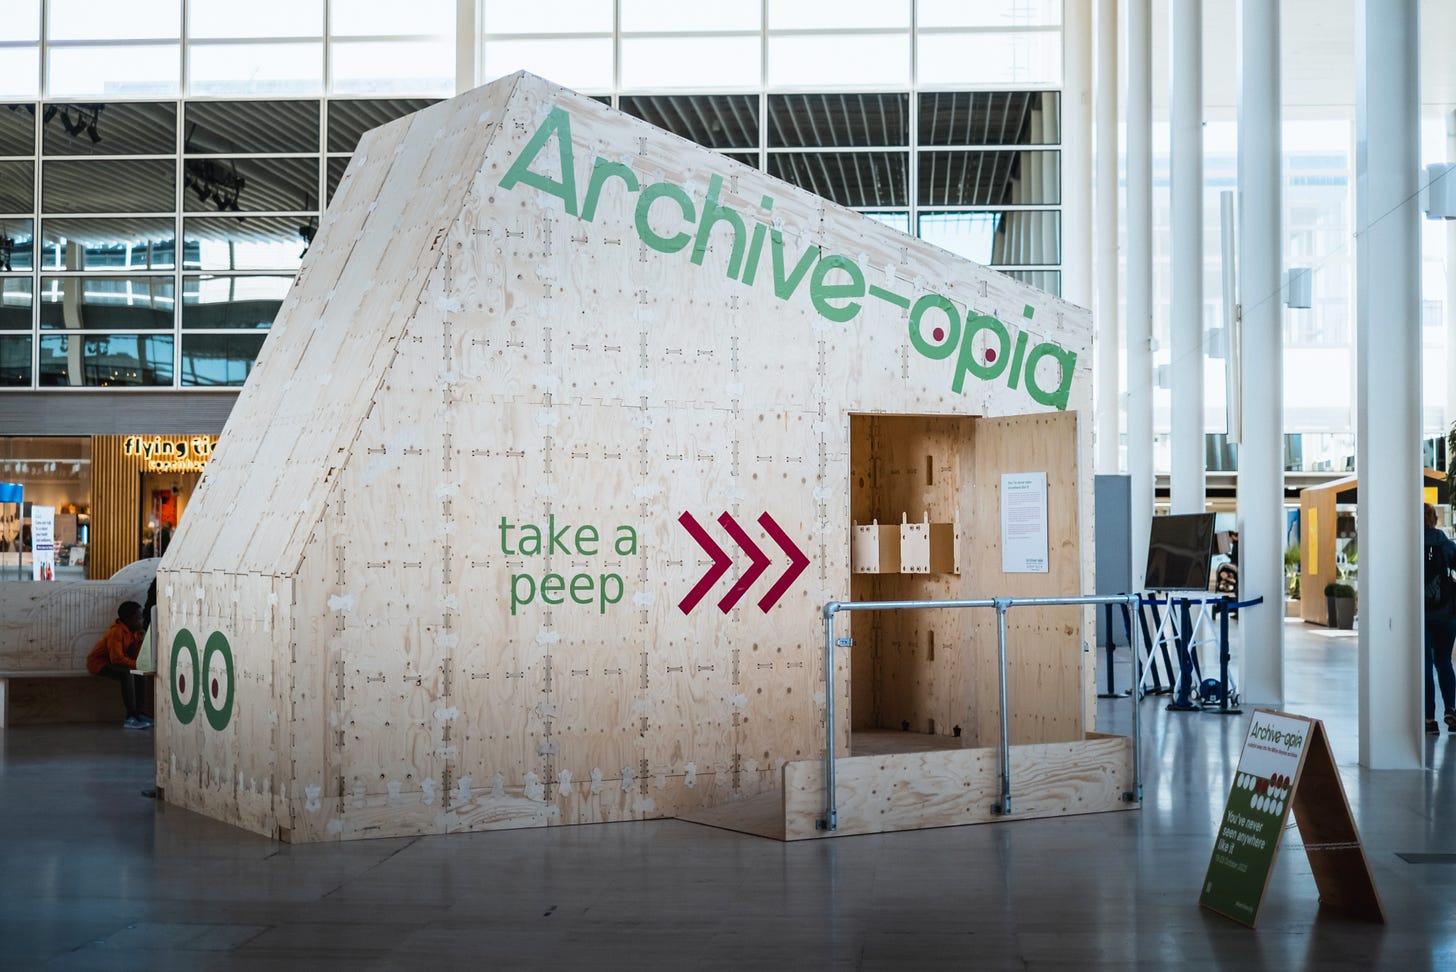 An image of the finished WikiPavilion project. The structure sits inside a shopping mall and has the words "Archive-opia" "take a peep" printed on its front